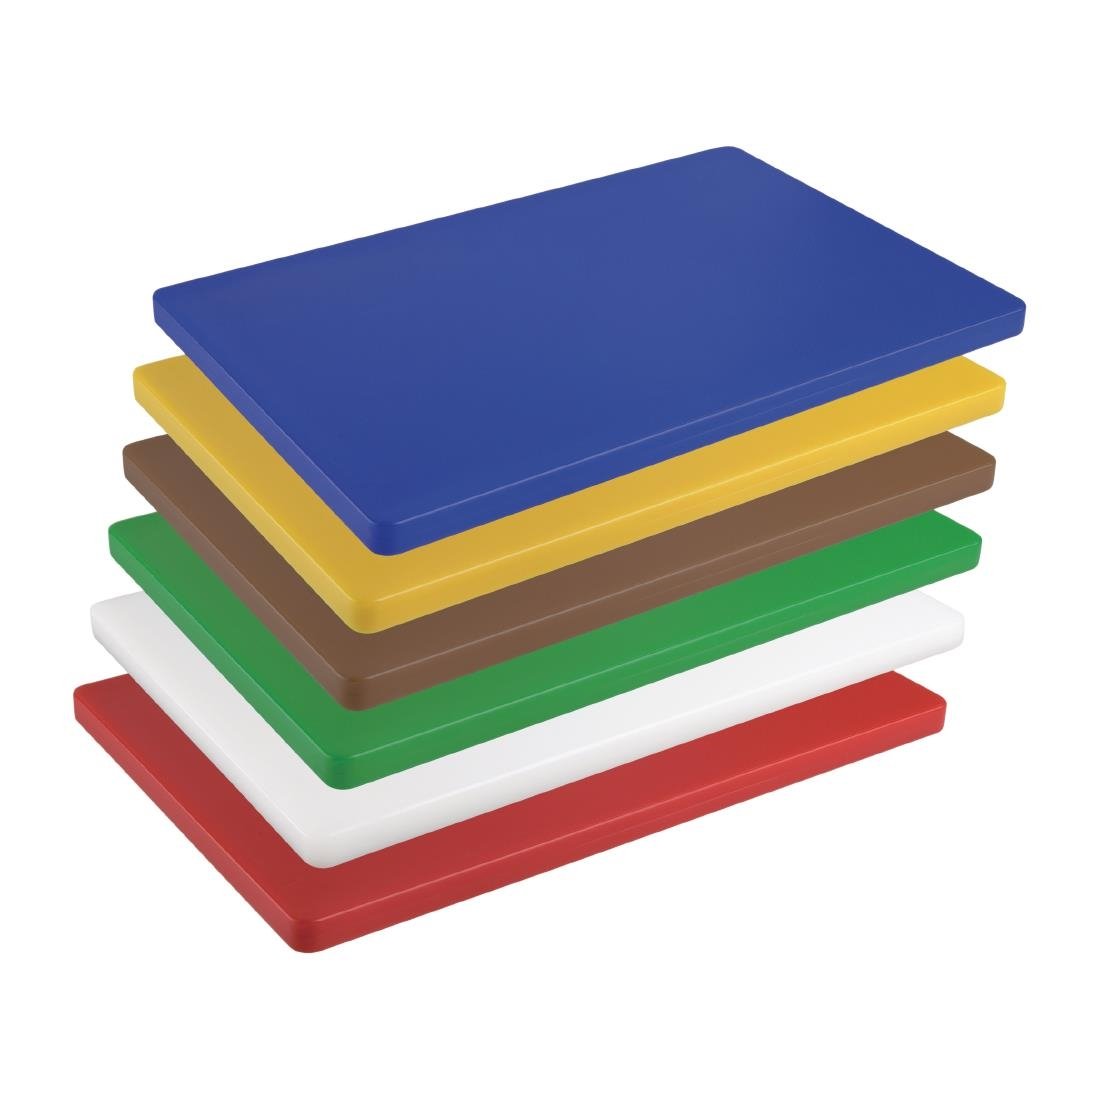 Hygiplas Extra Thick Low Density Blue Chopping Board Large JD Catering Equipment Solutions Ltd